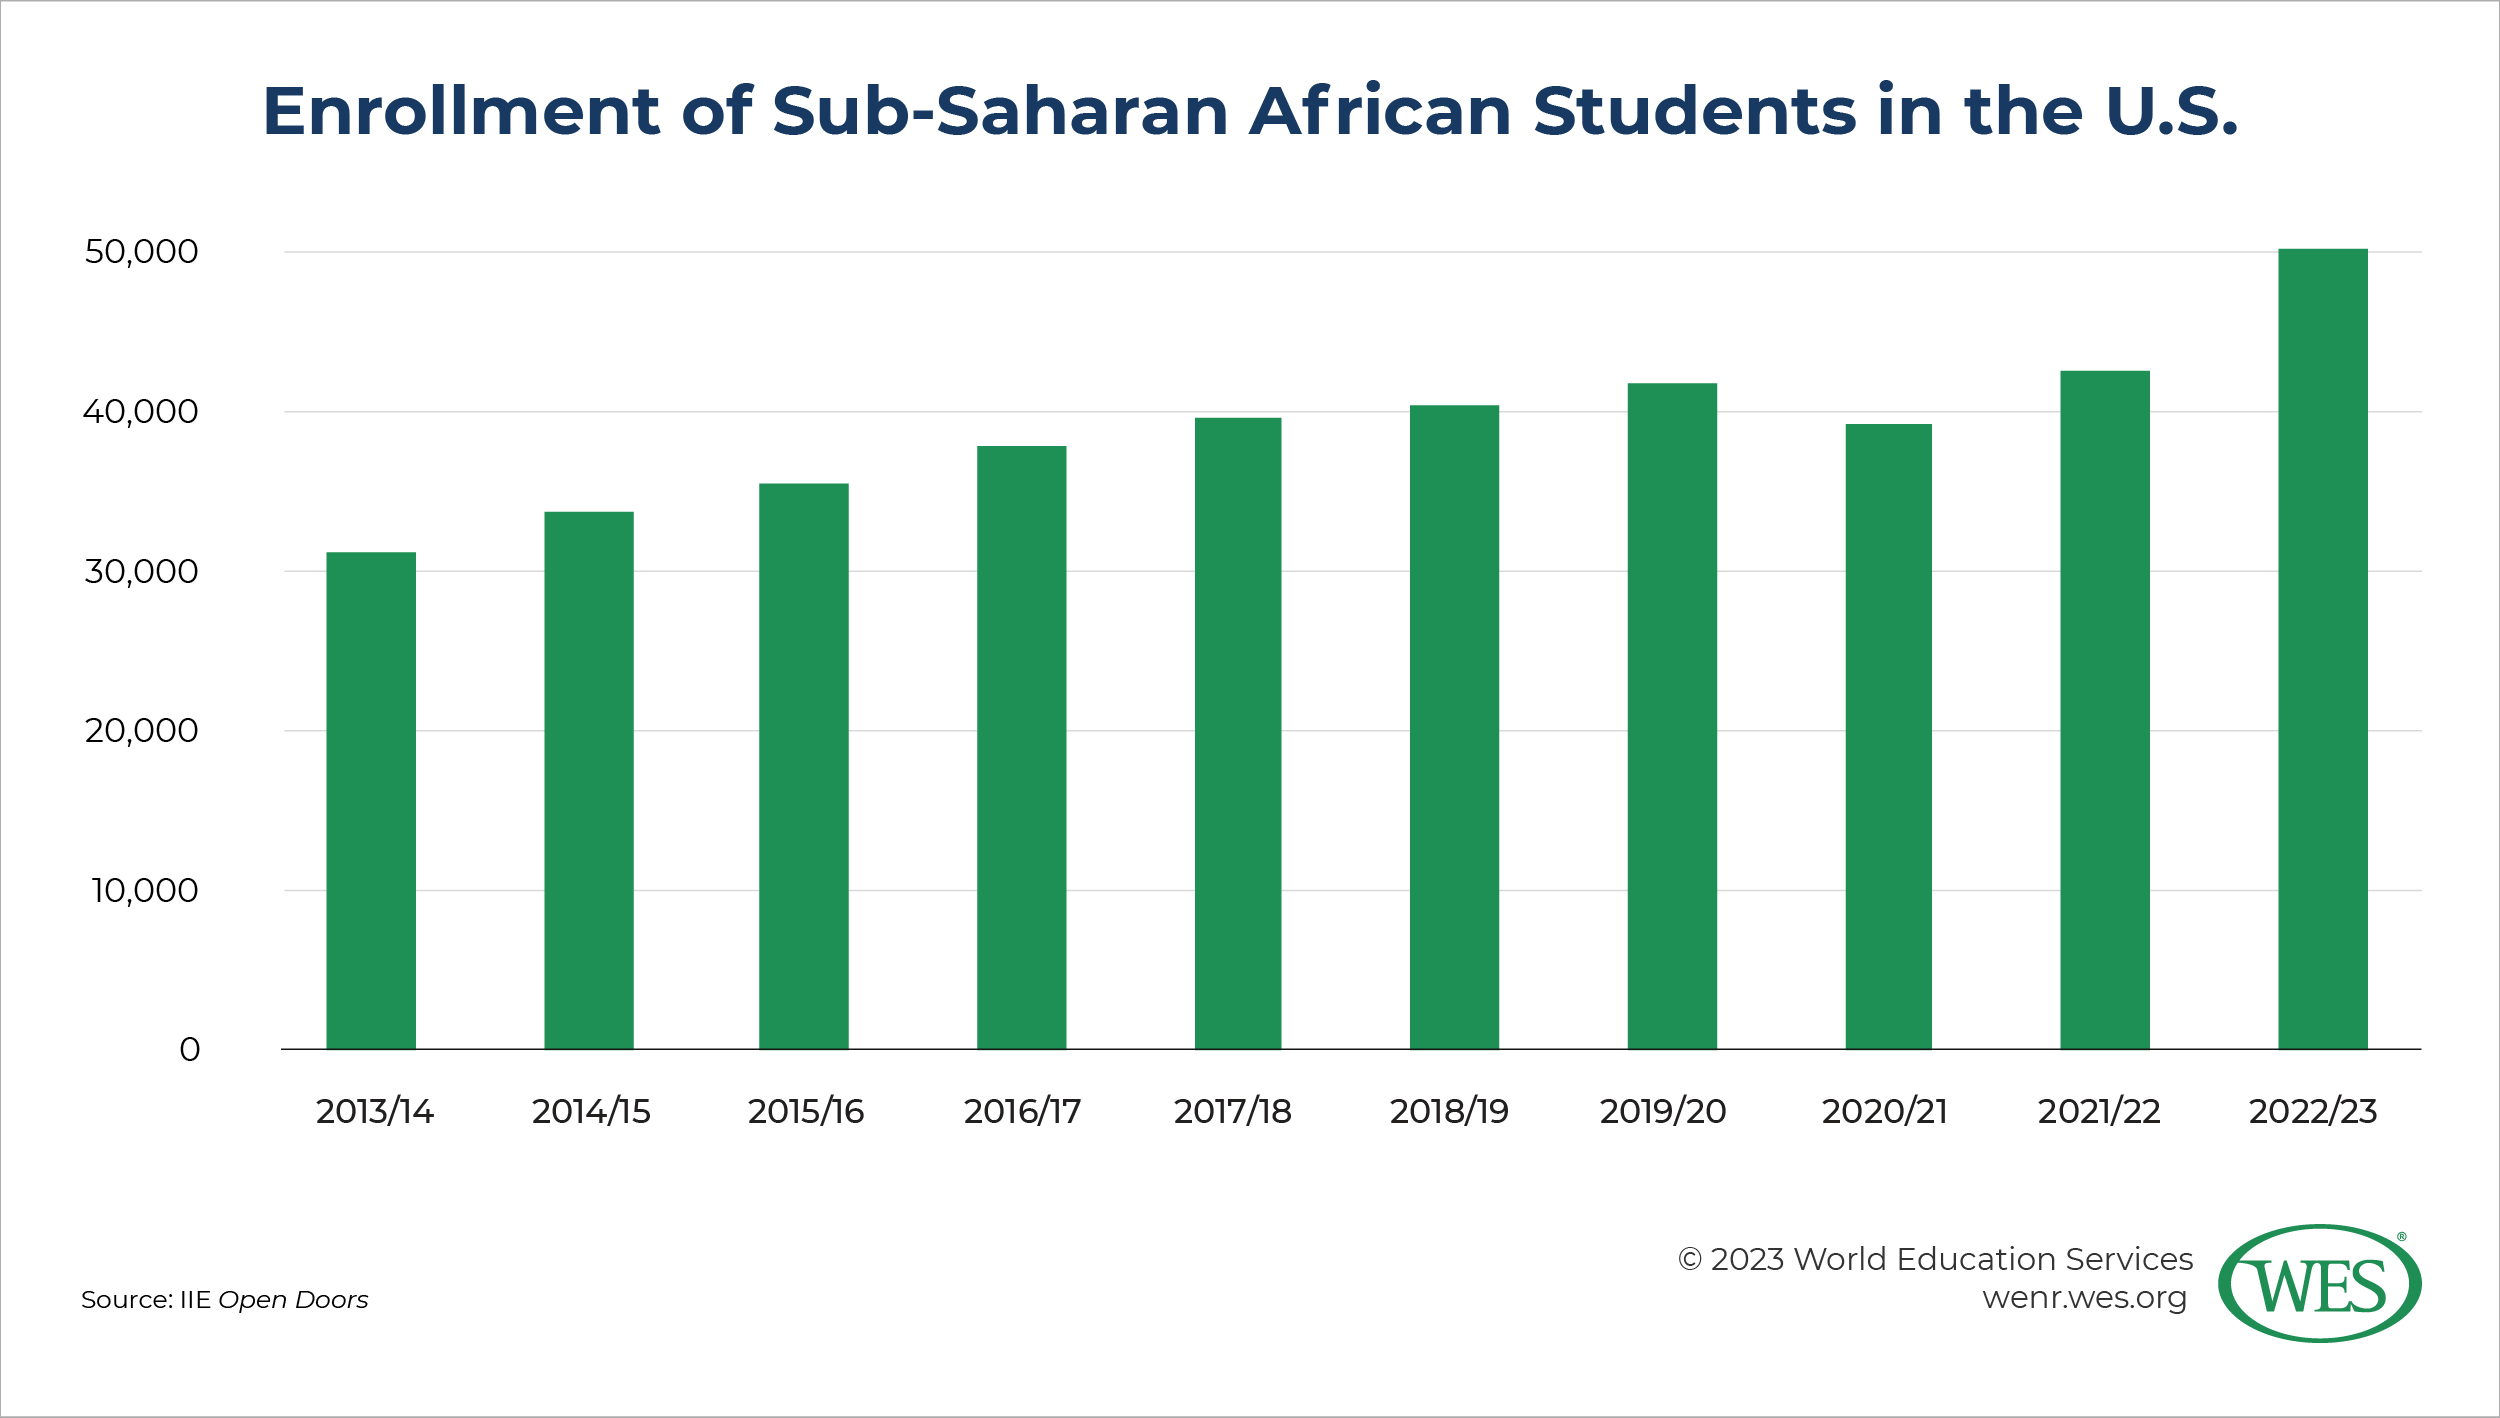 A chart showing the enrollment of sub-Saharan African students in the U.S. between 2013/14 and 2022/23.